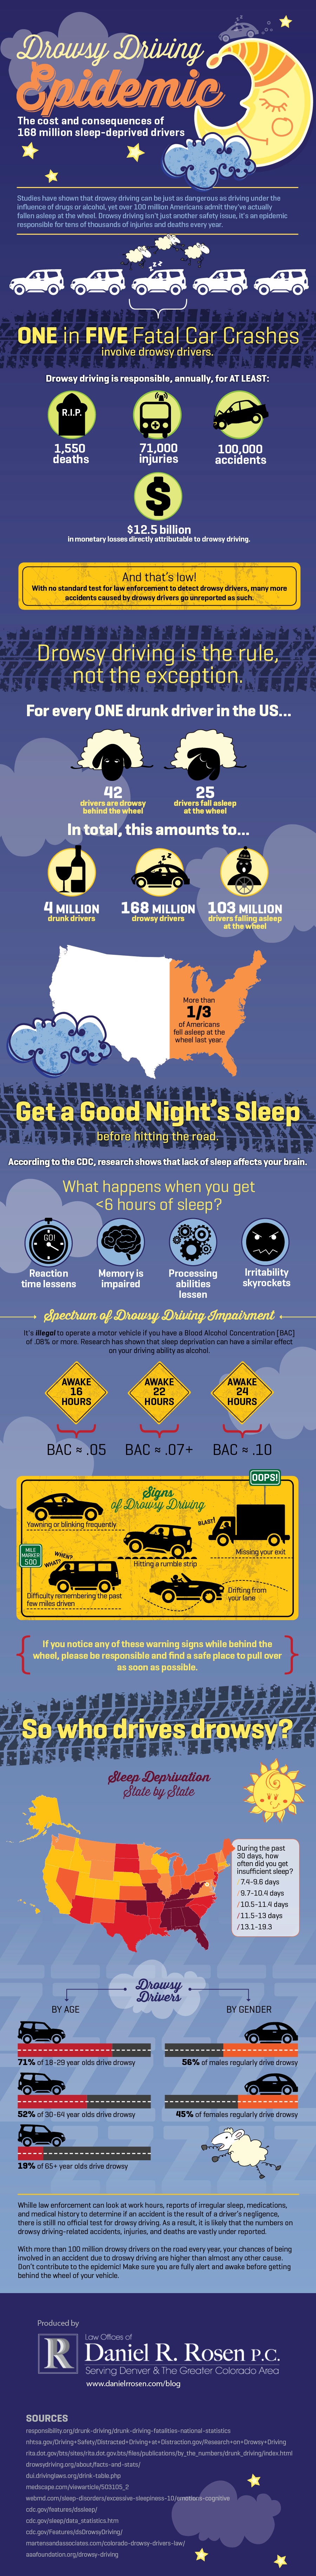 Drowsy Driving Epidemic Infographic